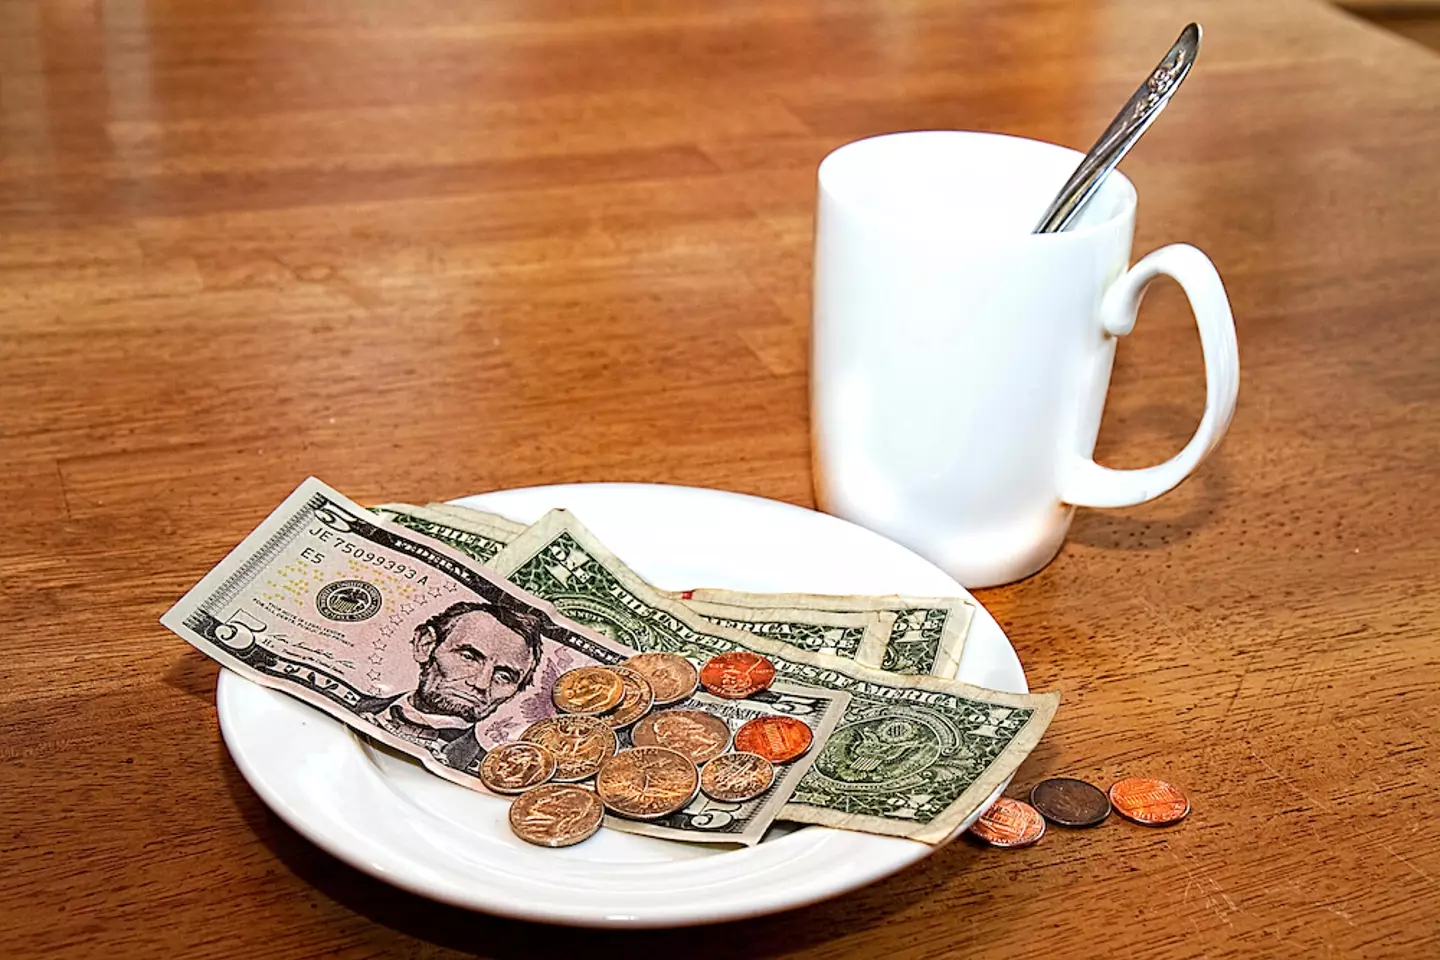 Tipping culture is a contentious topic.